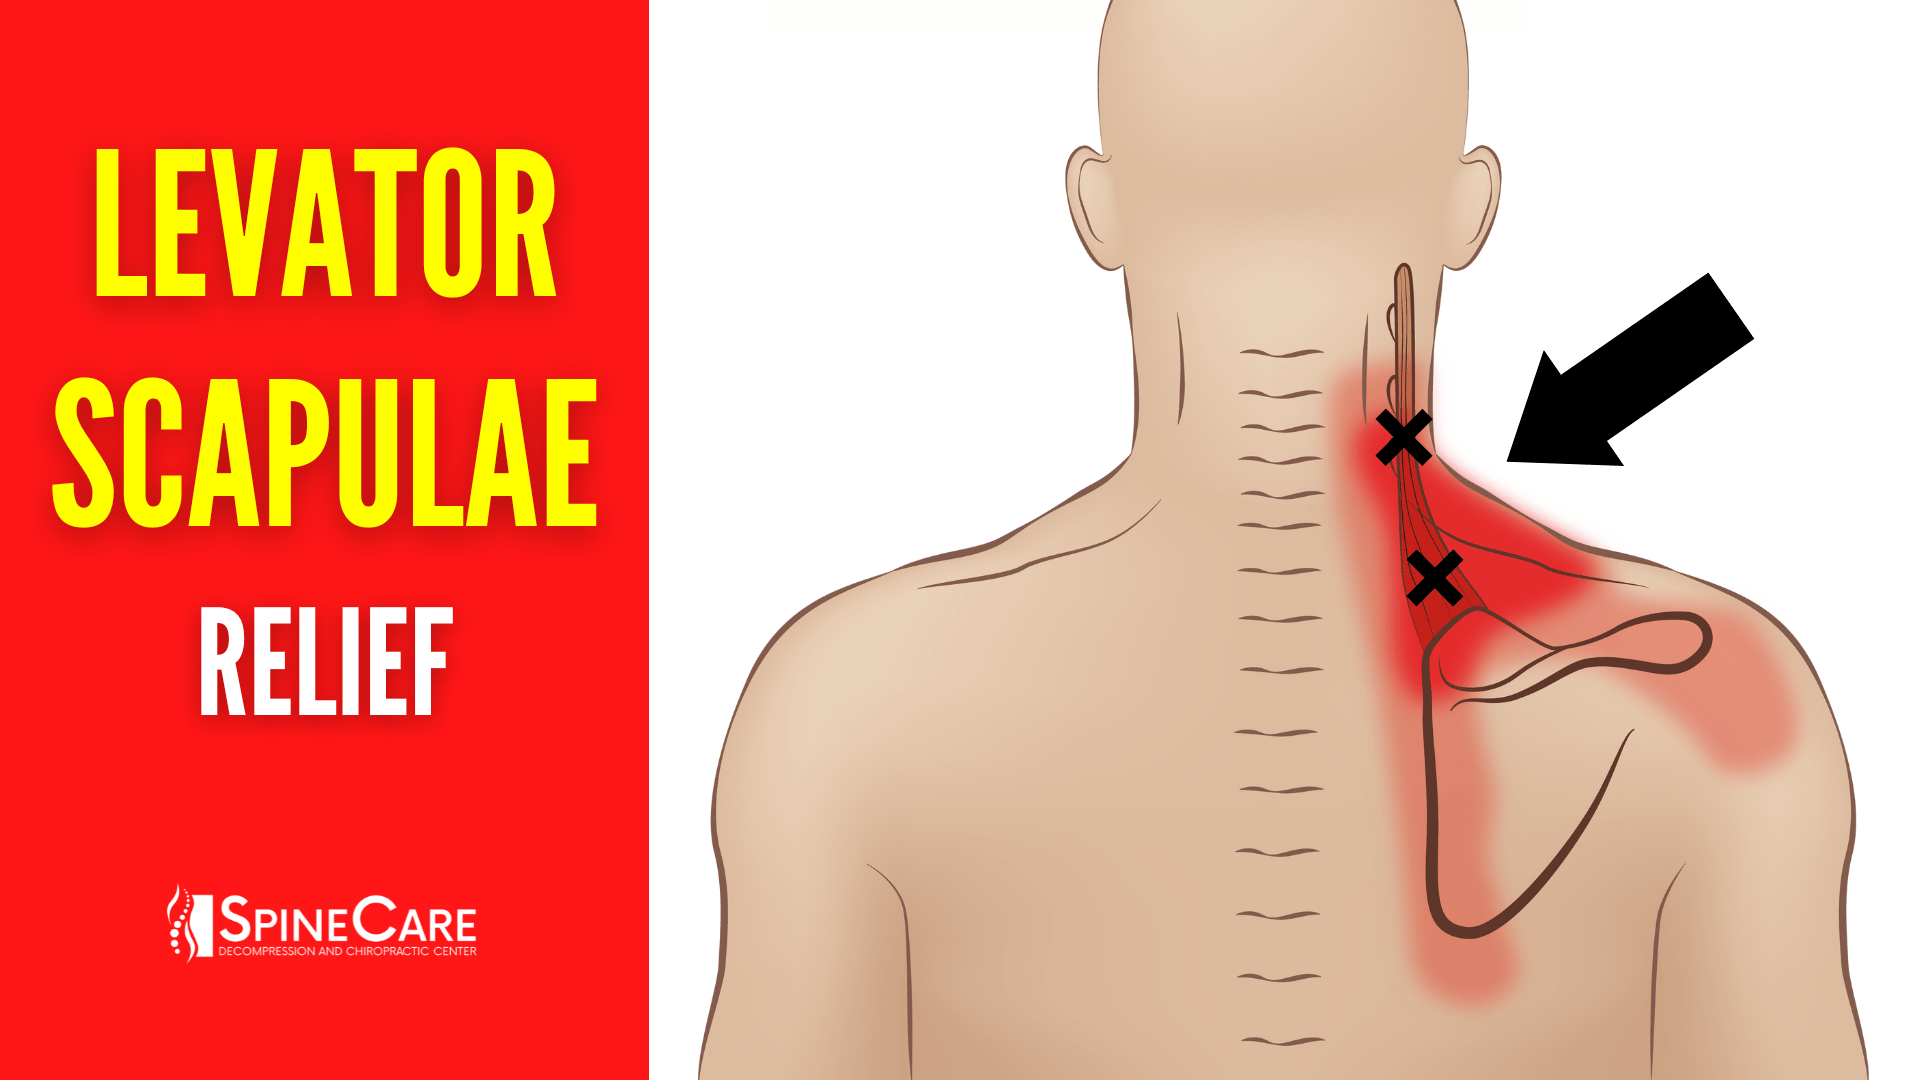 How to Fix Levator Scapulae Pain FOR GOOD | SpineCare | St. Joseph, Michigan Chiropractor